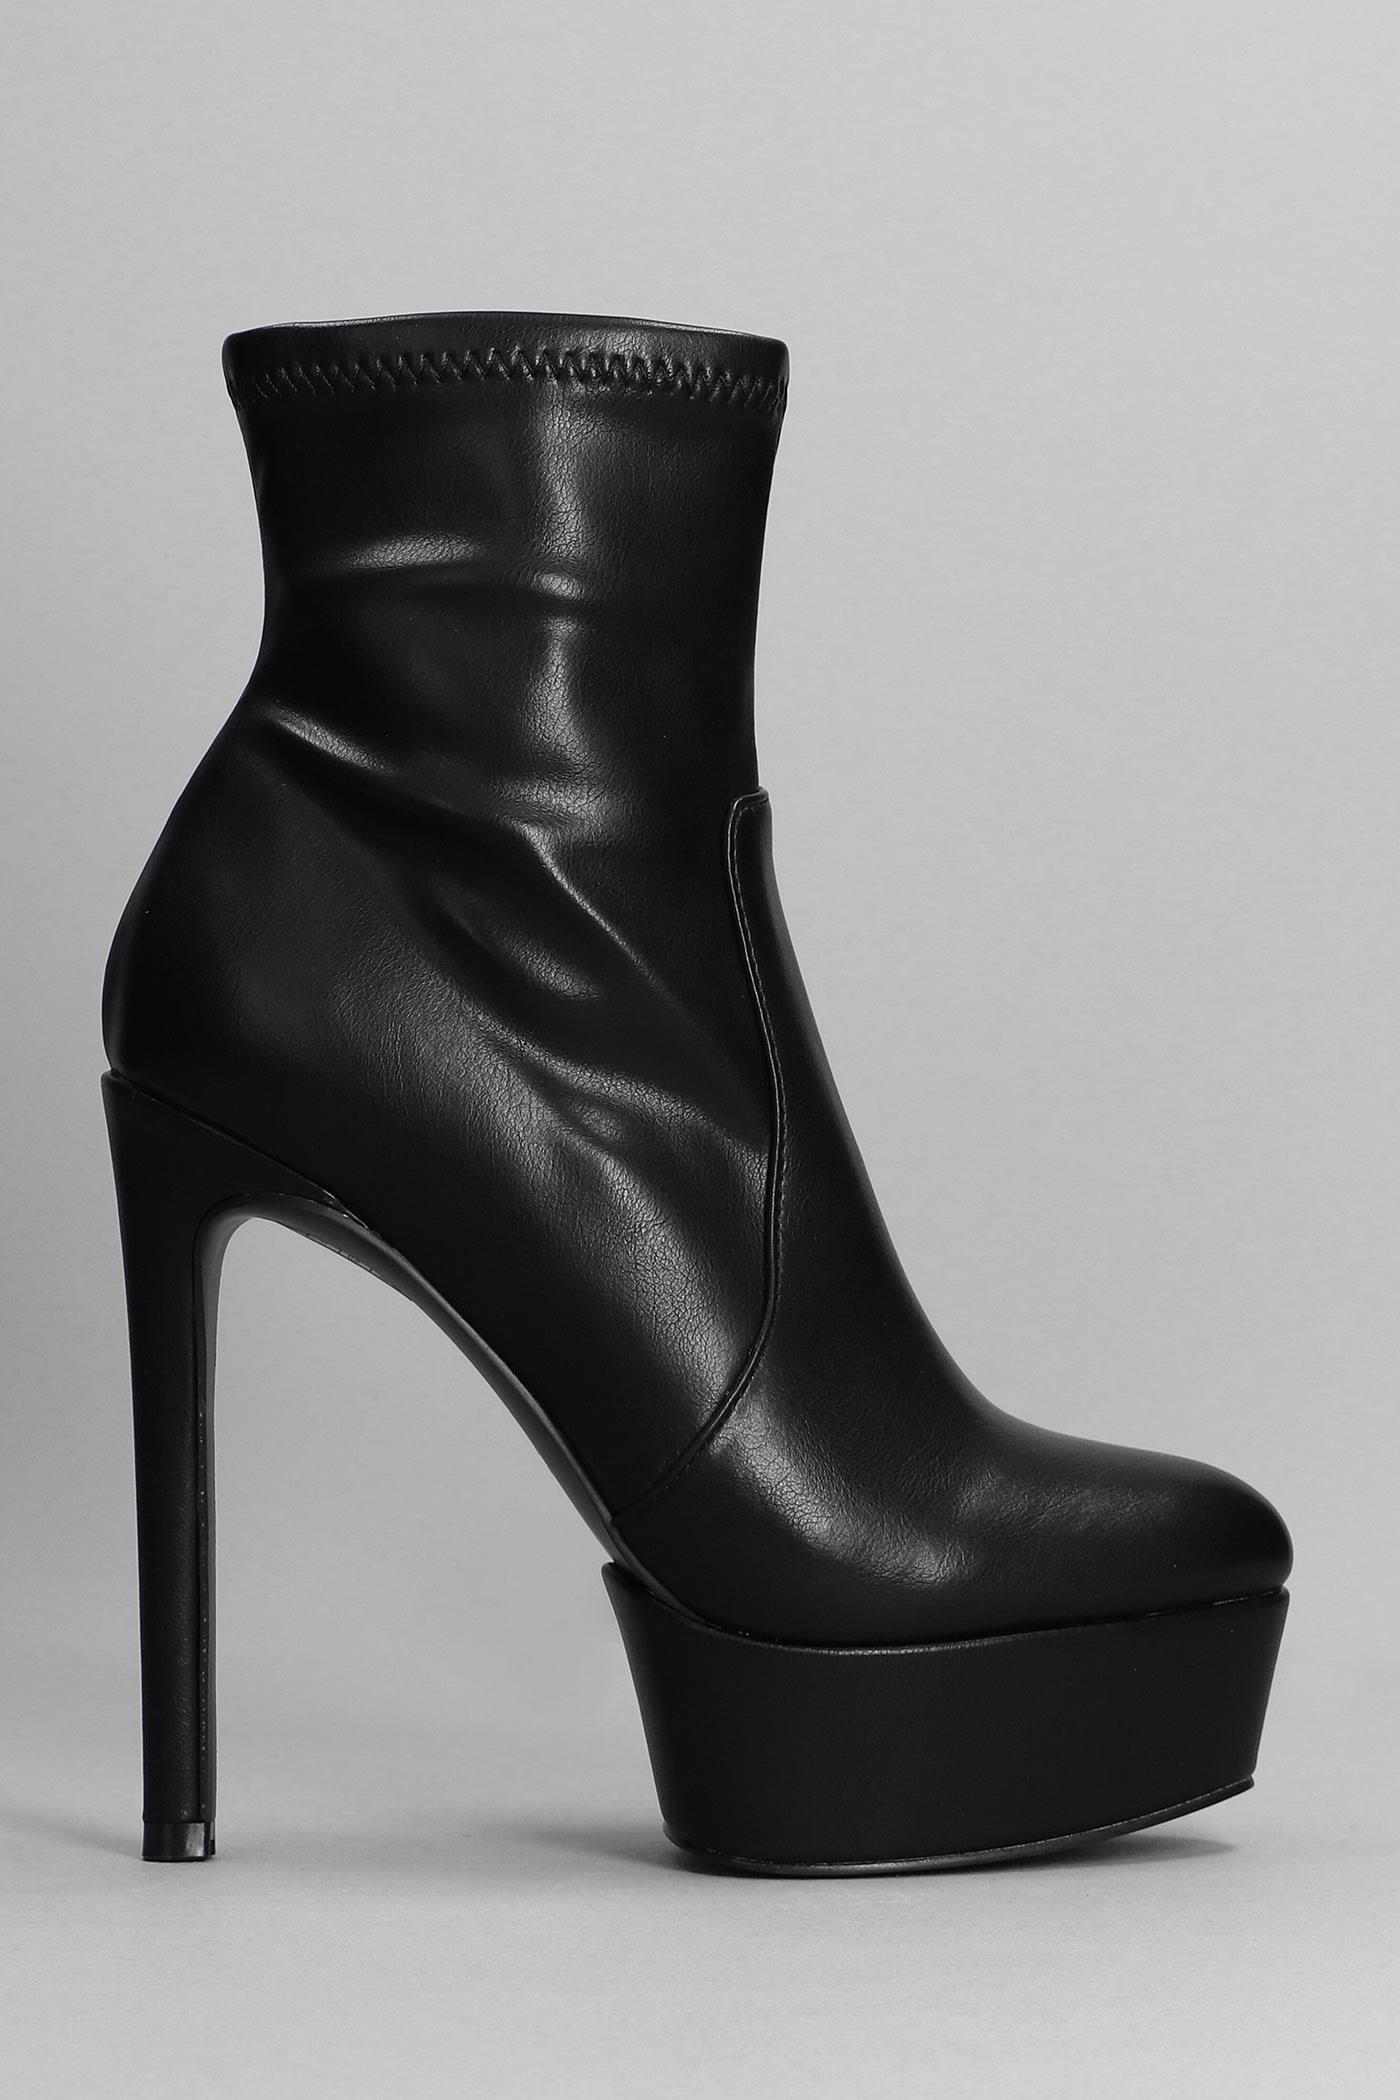 Steve Madden Tactical High Heels Ankle Boots In Black Leather | Lyst